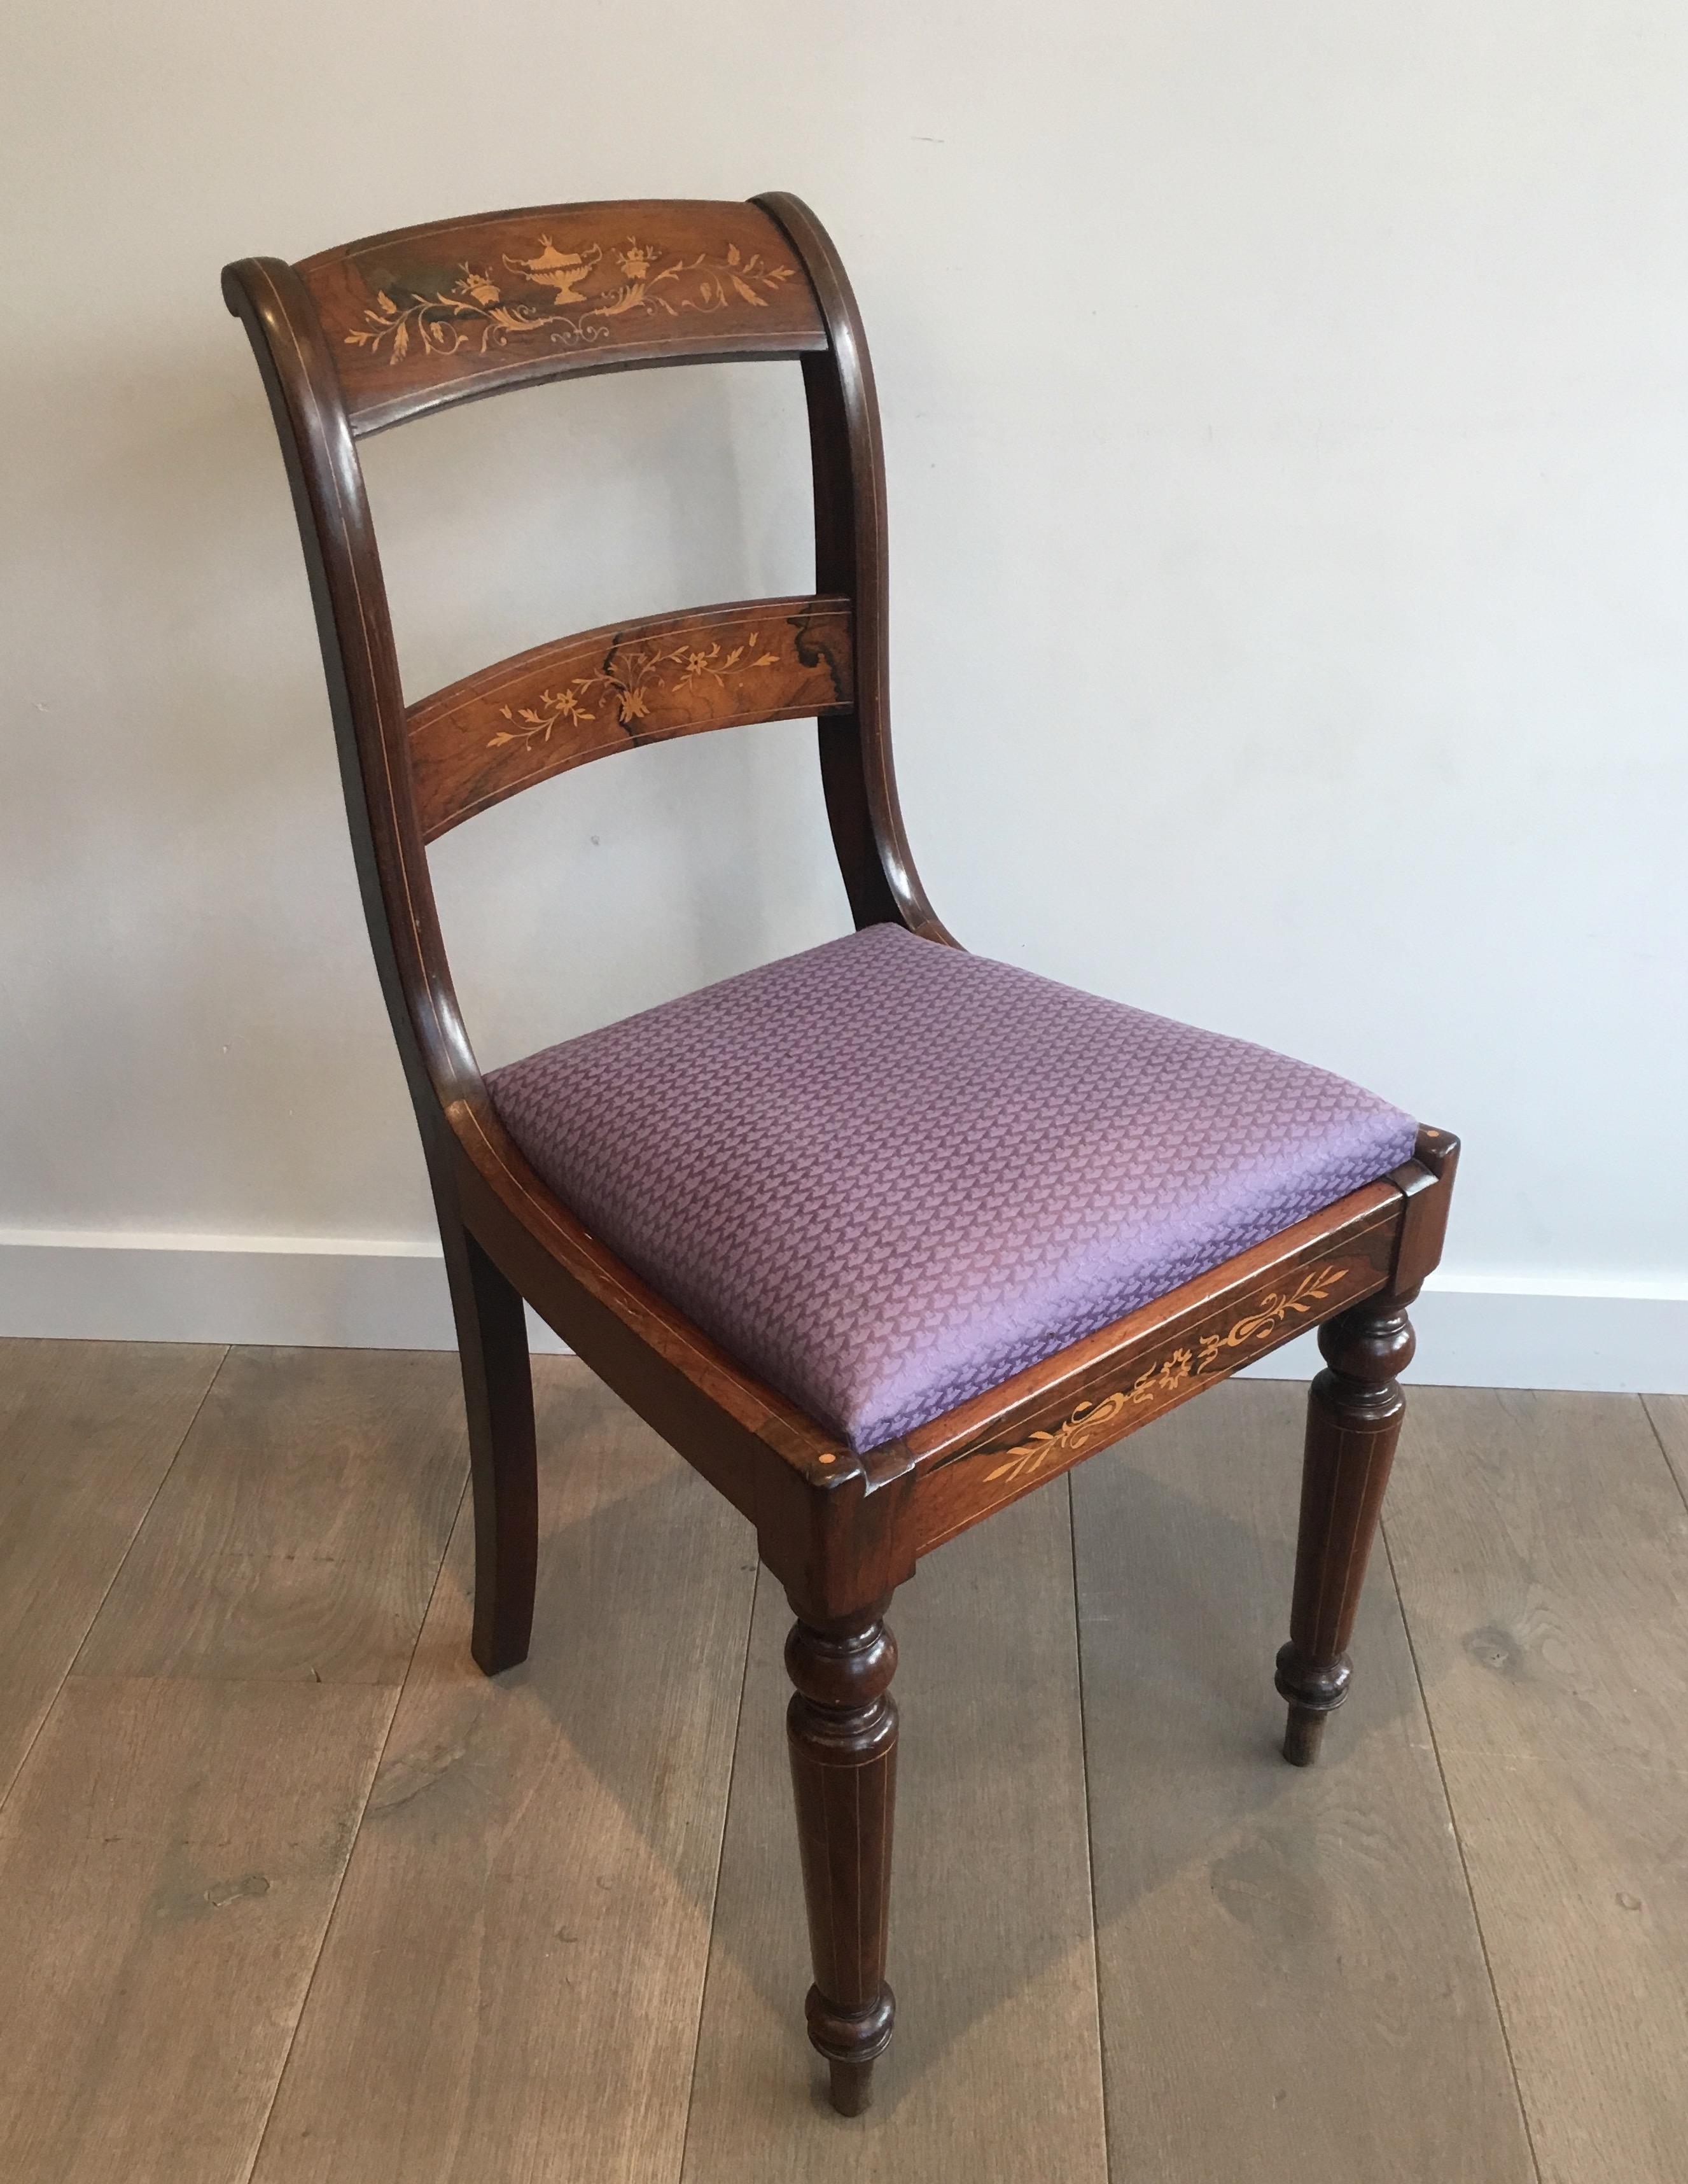 Charles the Xth Rosewood and Lemon Tree Chair Attributed to Jeanselme '3 Chairs' 3